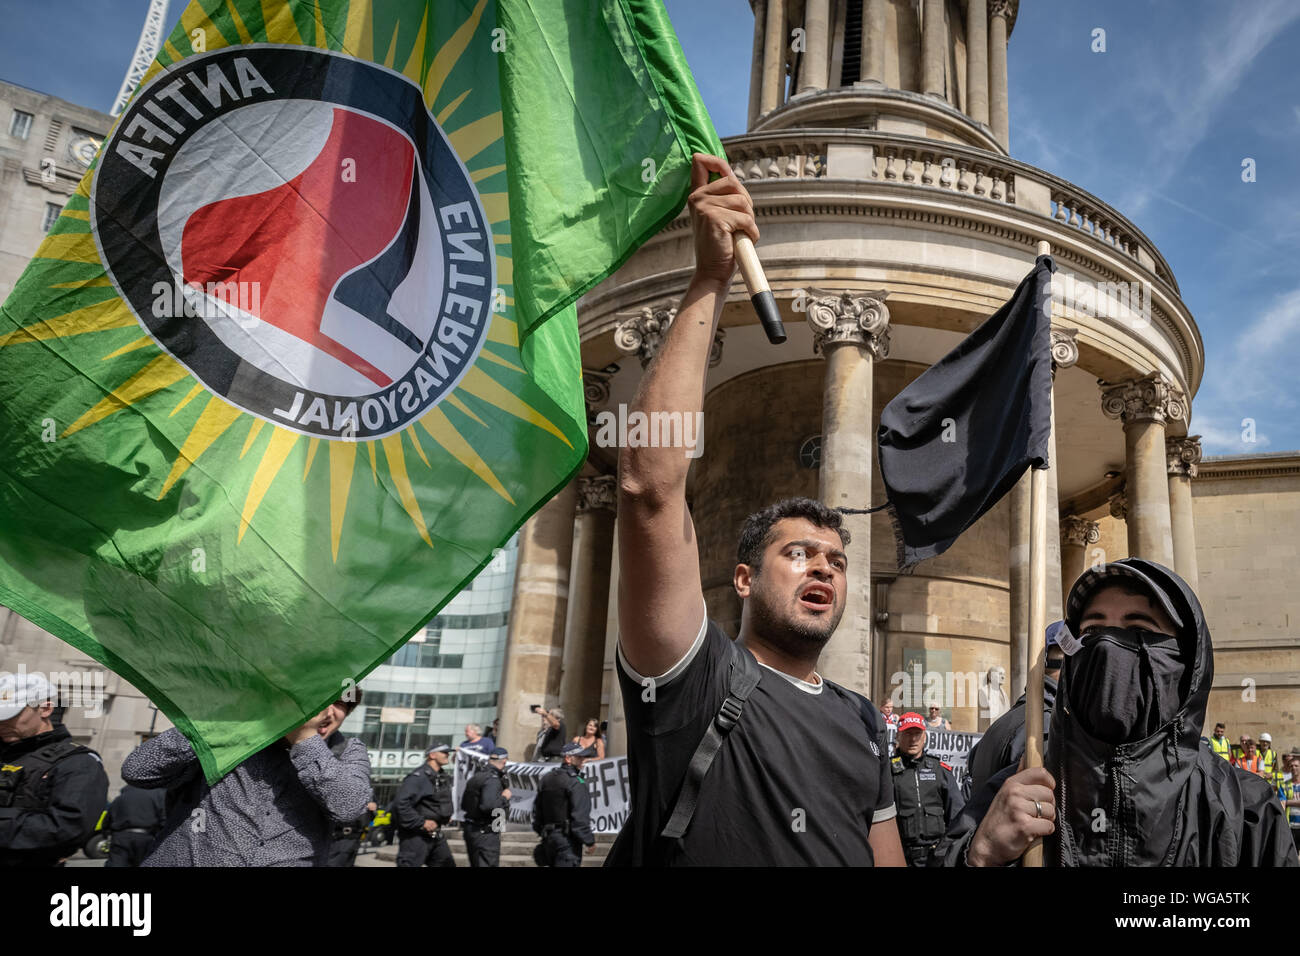 'Free Tommy Robinson' counter-protesters including antifascist activists oppose the pro-Robinson demonstrators outside BBC Broadcasting House, London. Stock Photo